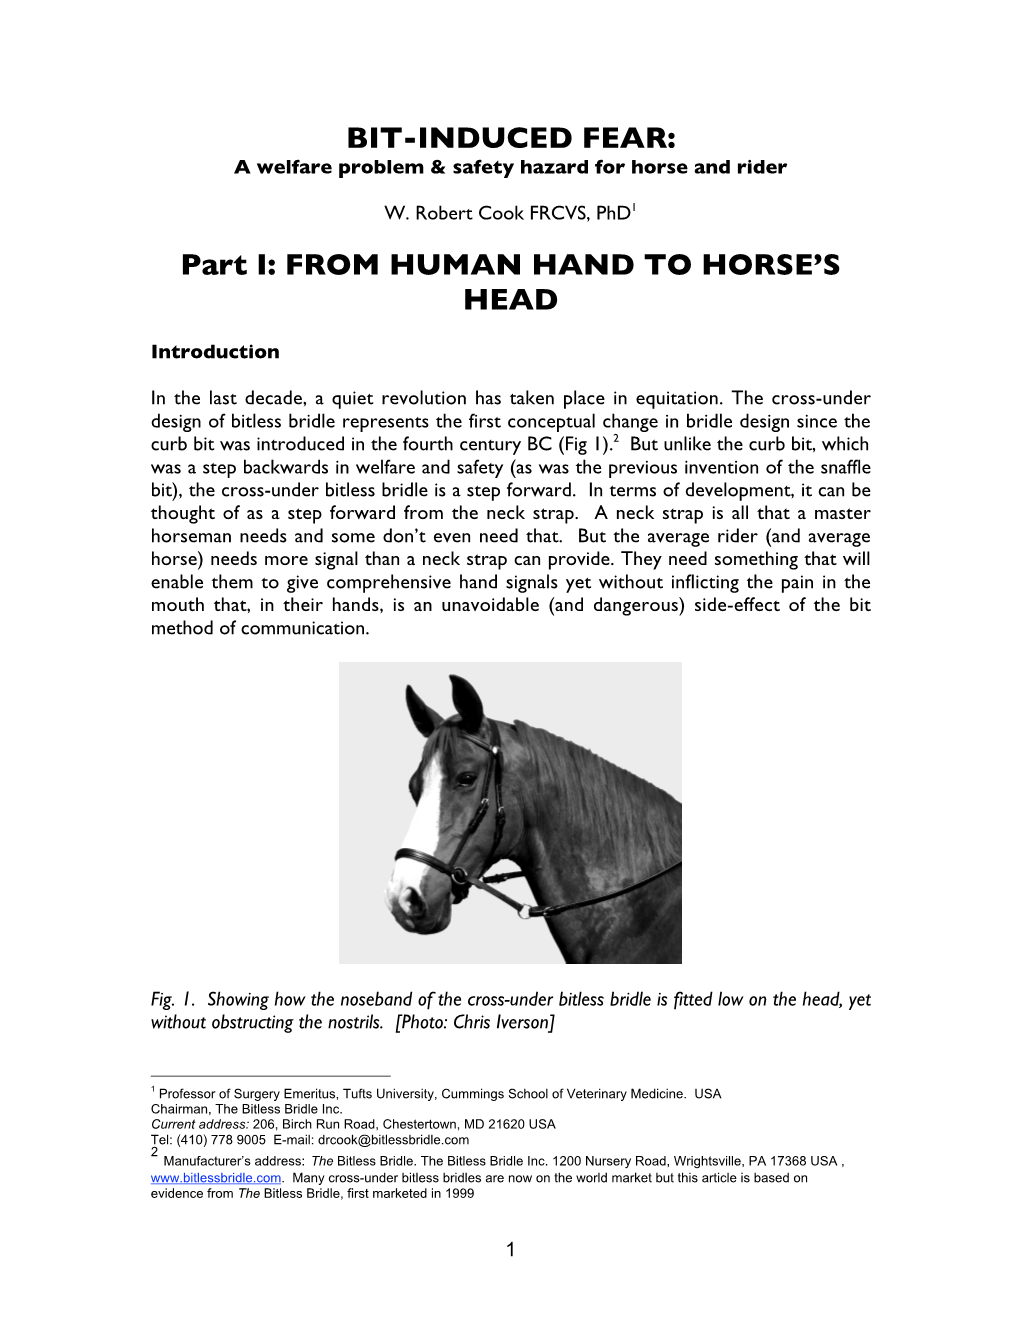 BIT-INDUCED FEAR: Part I: from HUMAN HAND to HORSE's HEAD